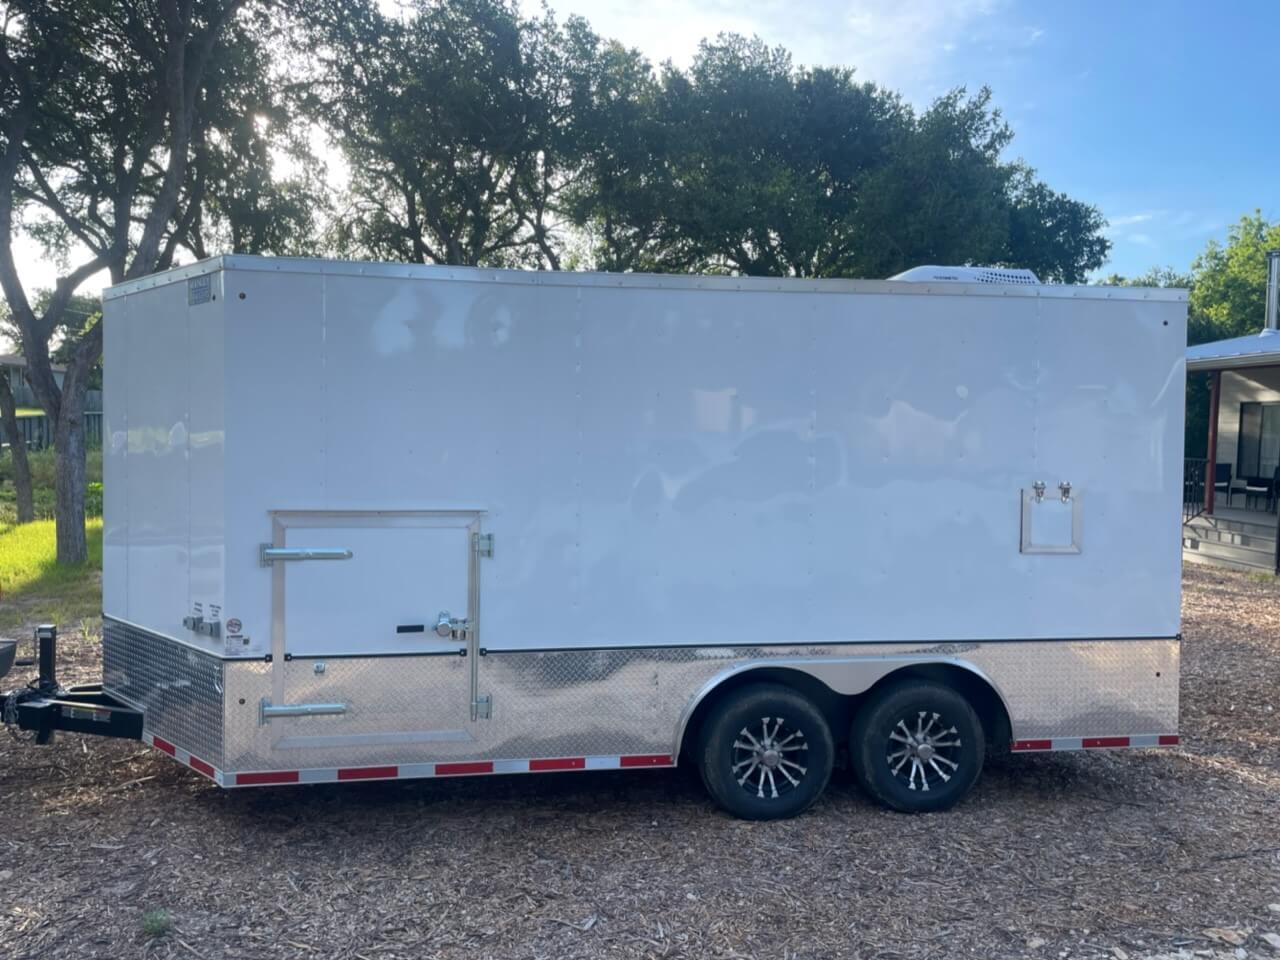 Side Profile of Spray Foam Rig parked outside of a house